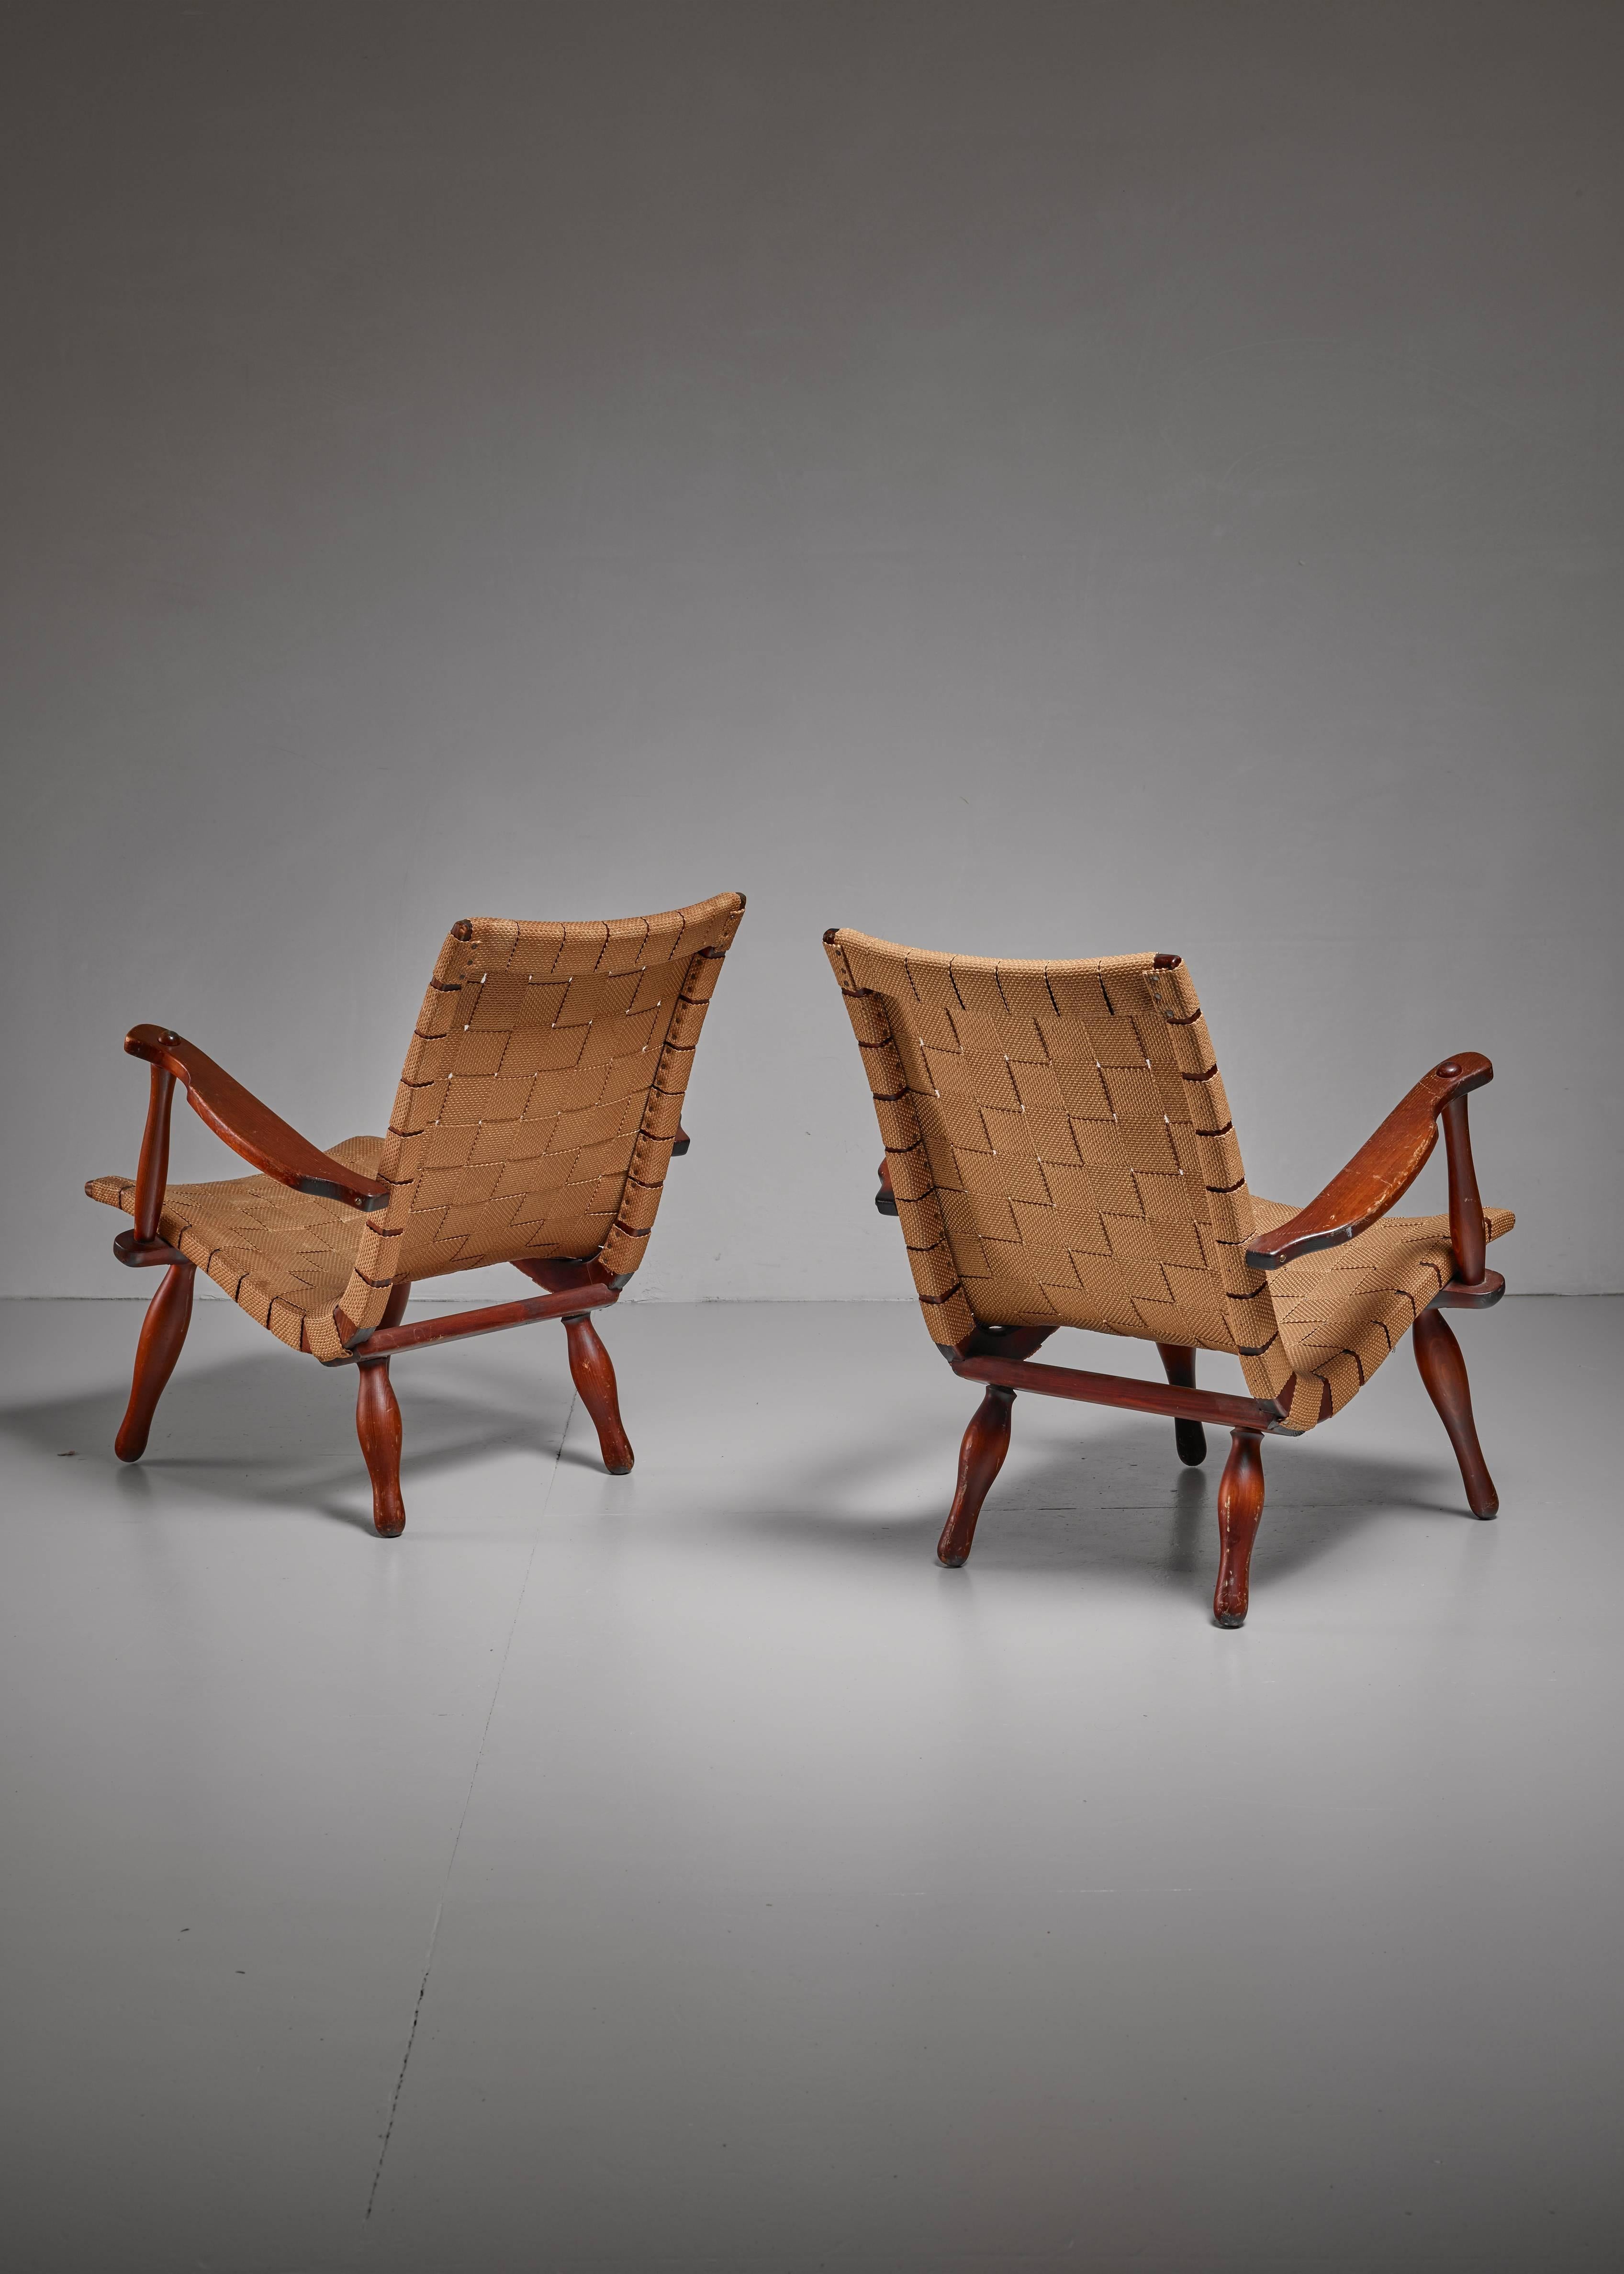 Swedish Pair of Lounge Chairs with Webbed Seating, Sweden, 1940s For Sale